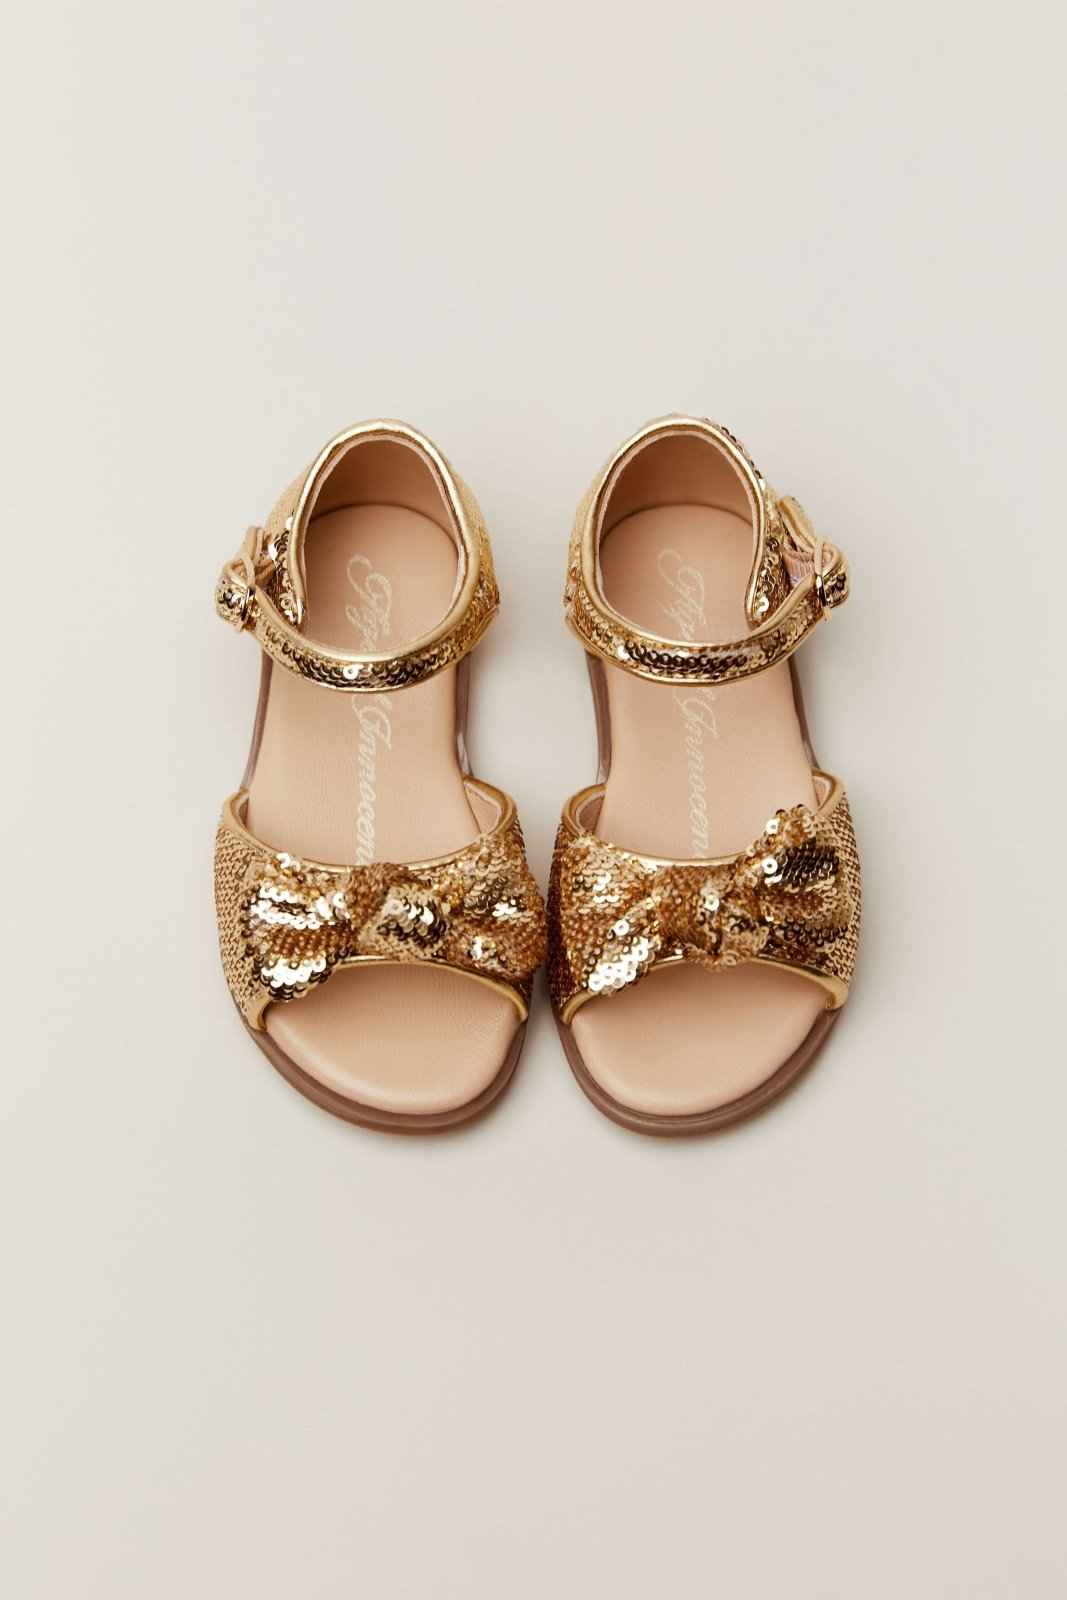 Margo Sequins Gold Sandals by Age of Innocence